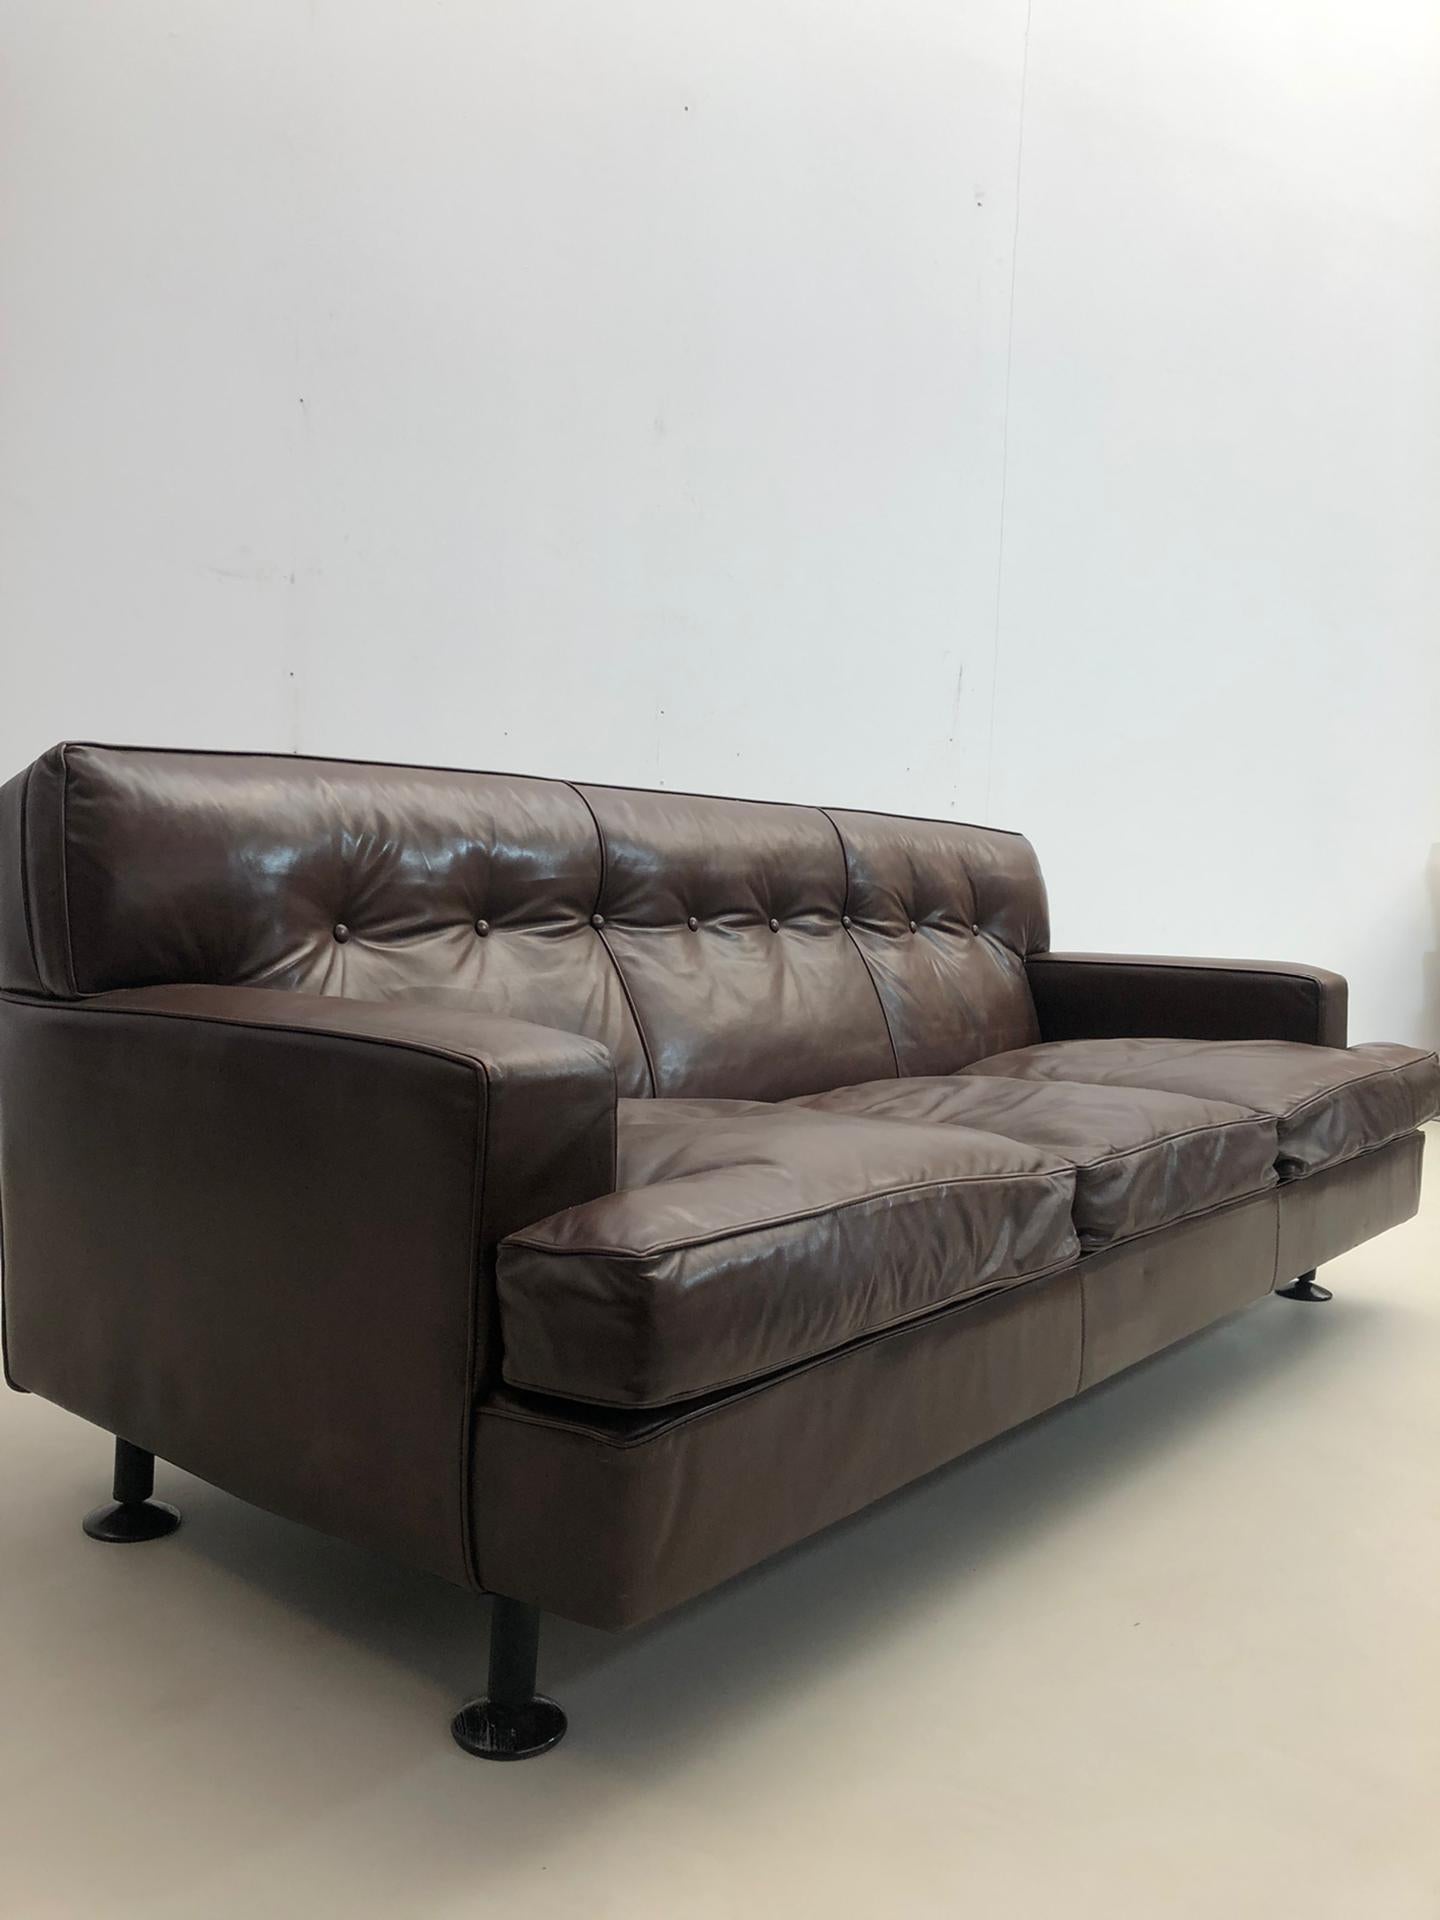 Mid-Century Brown Leather Square Sofa by Marco Zanuso for Arflex, 1960s For Sale 1